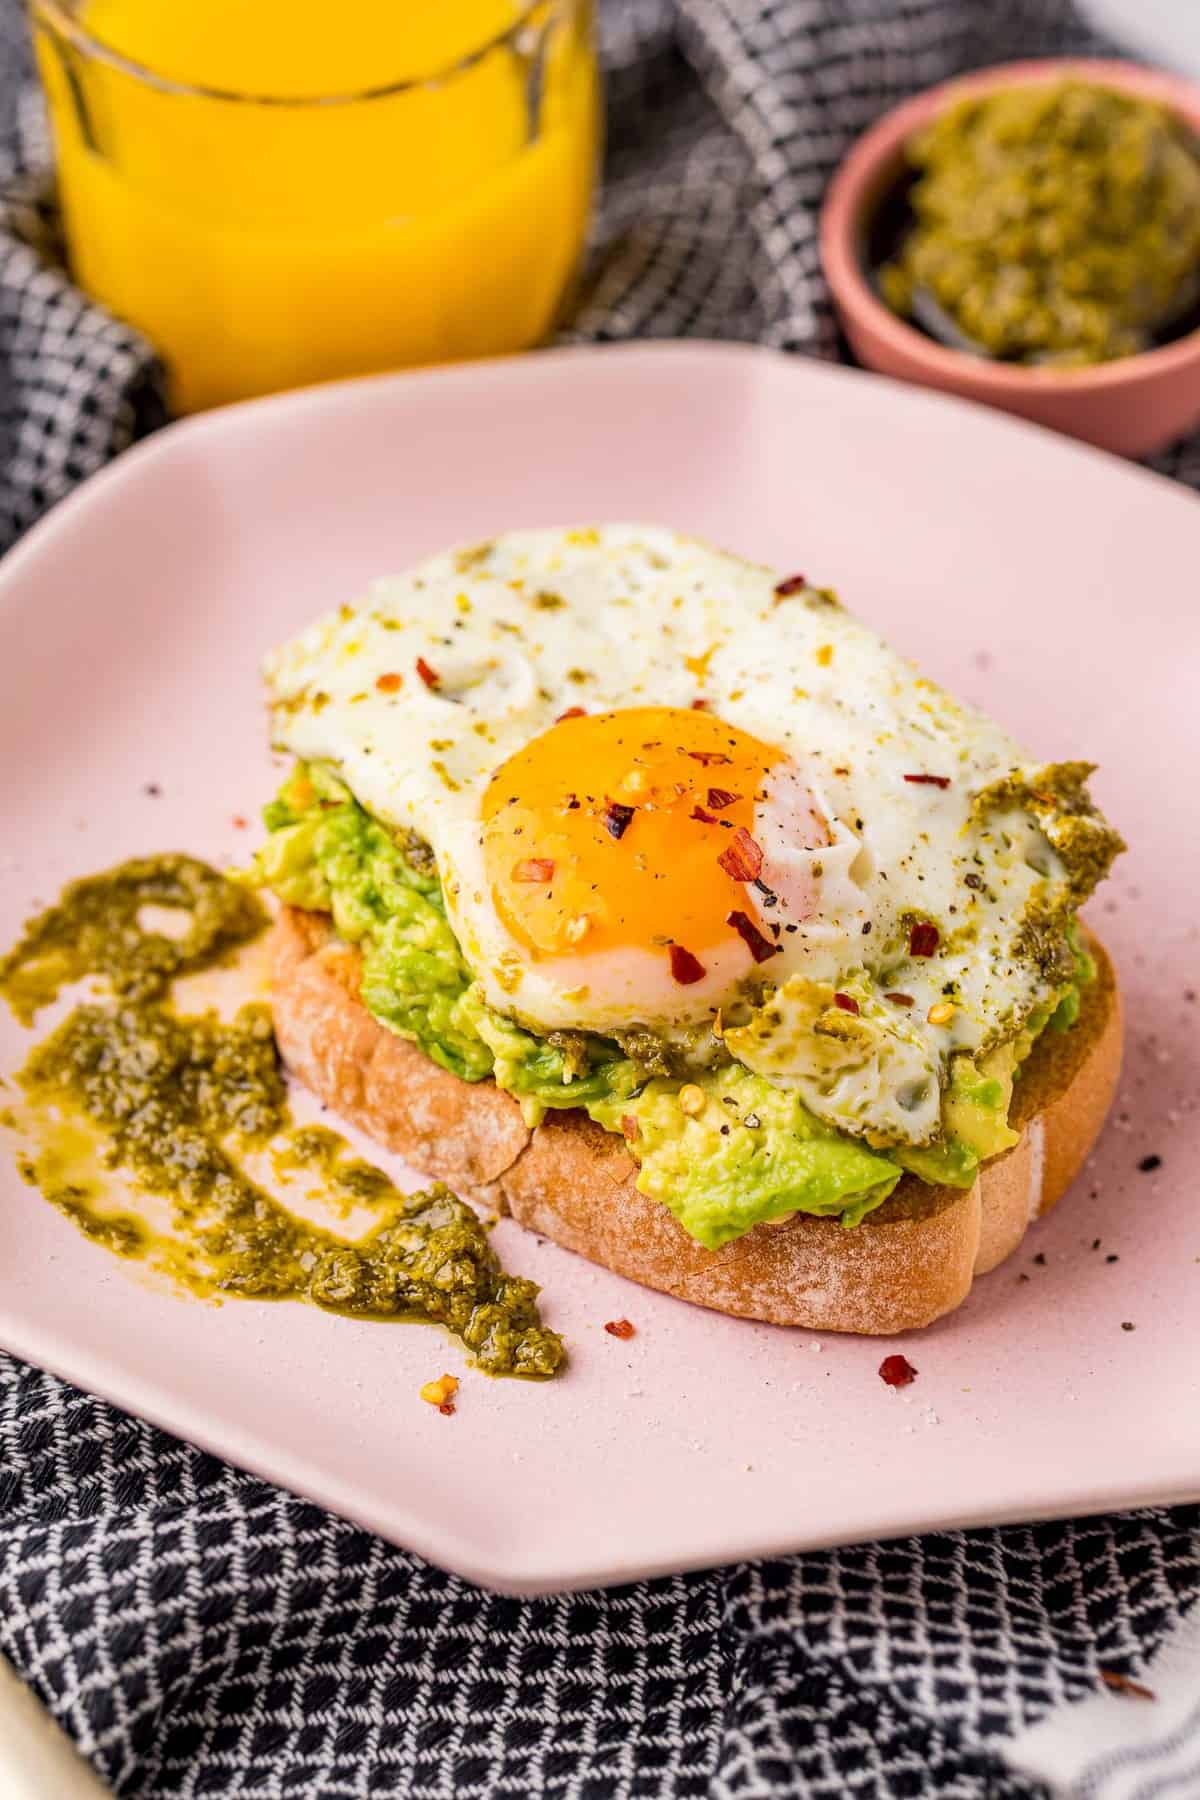 Cooked egg with pesto on avocado toast on a pink plate.